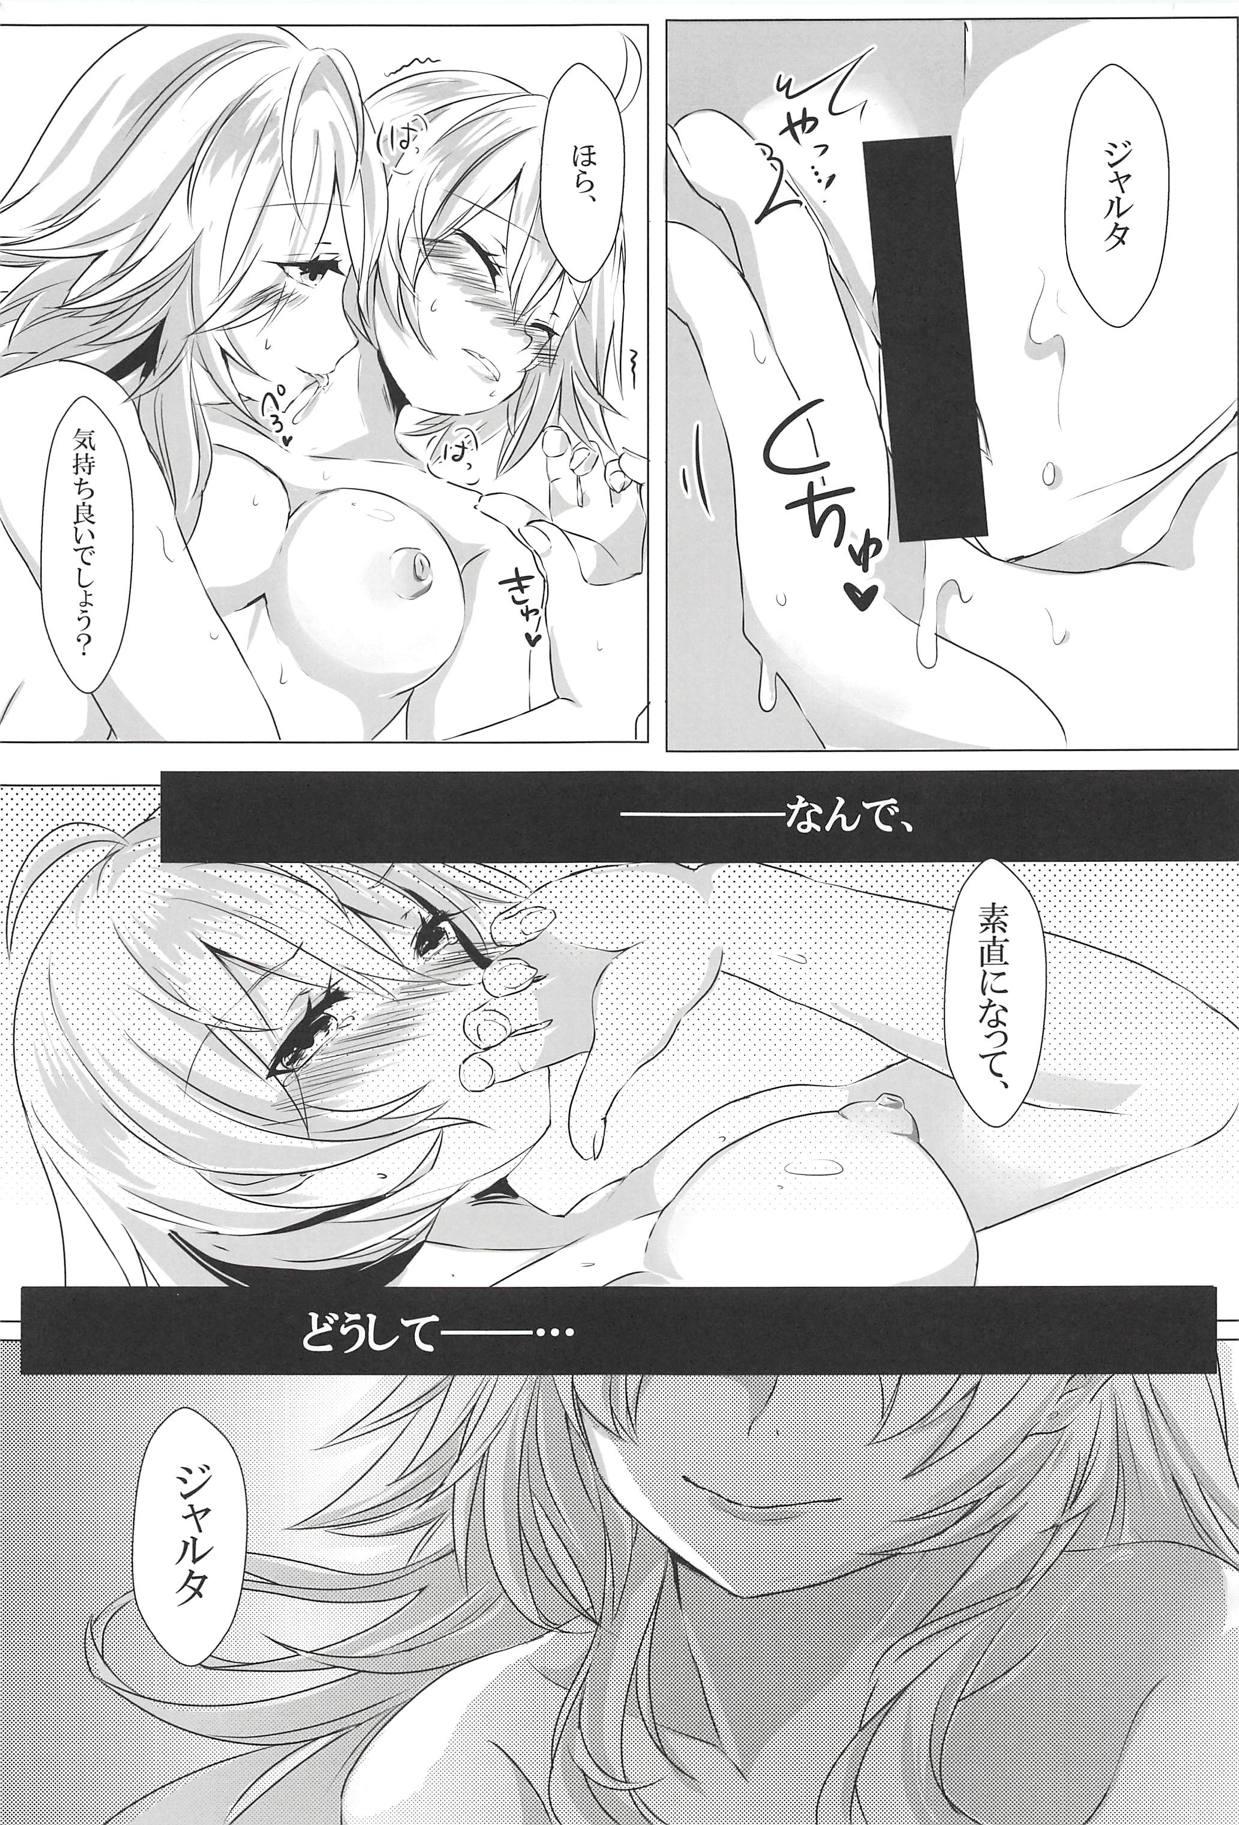 Brasil TWIN SCANDAL - Fate grand order Leche - Page 6